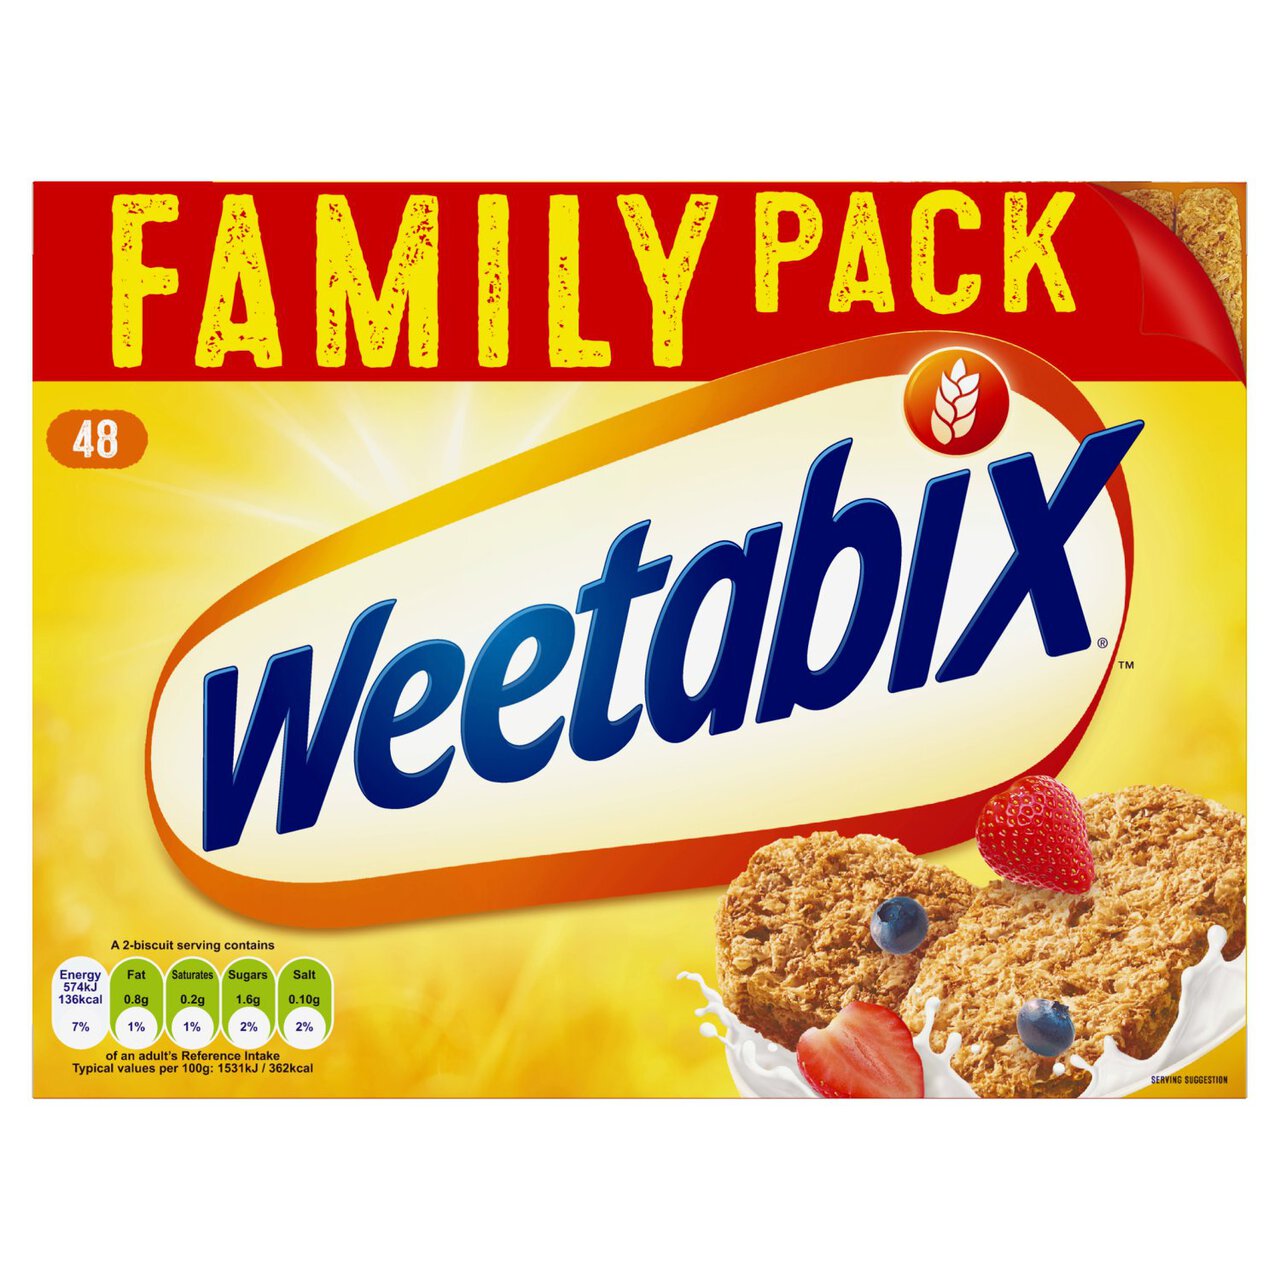 Weetabix Cereal 48 per pack